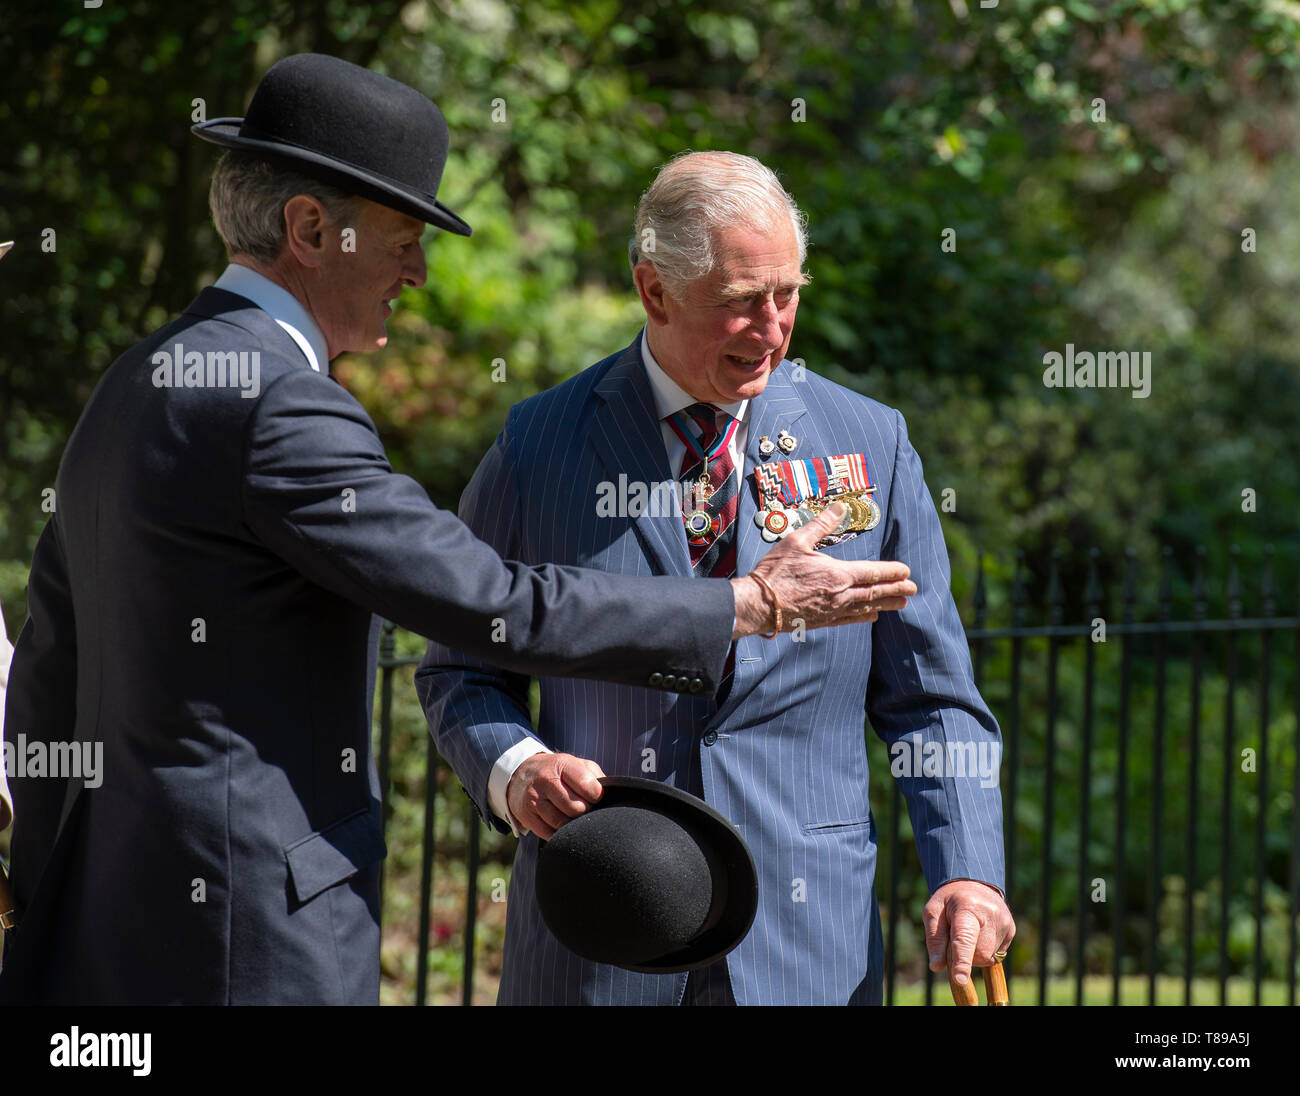 Hyde Park London, UK. 12th May 2019. HRH The Prince of Wales, Field Marshal, Colonel in Chief 1st The Queen’s Dragoon Guards, arrives to take the salute at the Combined Cavalry Old Comrades Association 95th annual parade and service. The parade is commanded by Lieutenant-General Sir Simon Mayall, KCB, CB, Colonel of 1st The Queens Dragoon Guards who are the sponsor regiment of this year’s event. Credit: Malcolm Park/Alamy Live News. Stock Photo